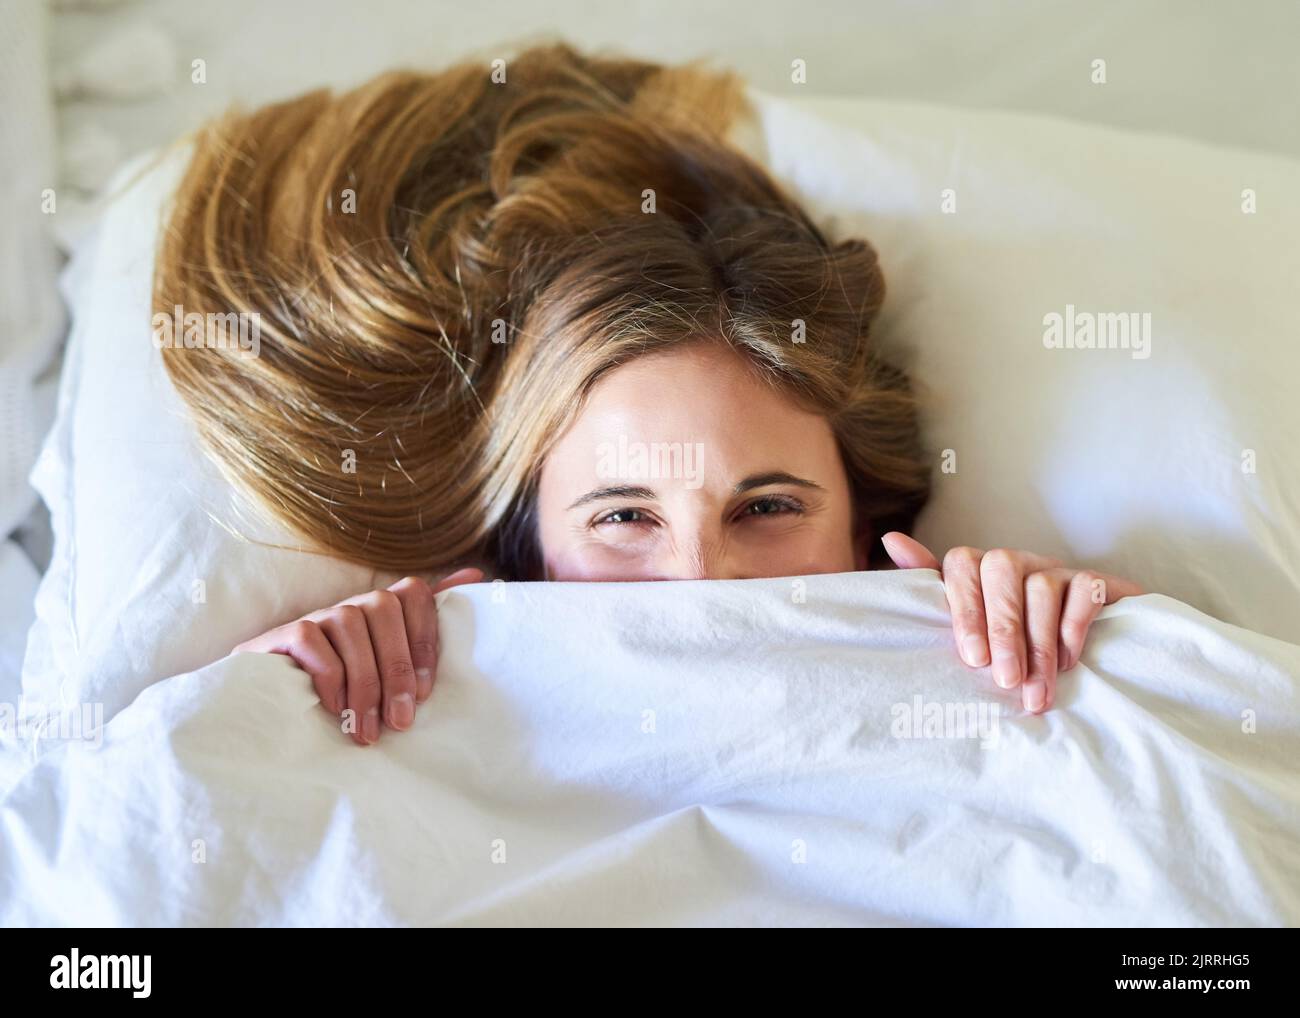 Sunday is duvet day. Portrait of a playful young woman hiding under the covers in her bed. Stock Photo